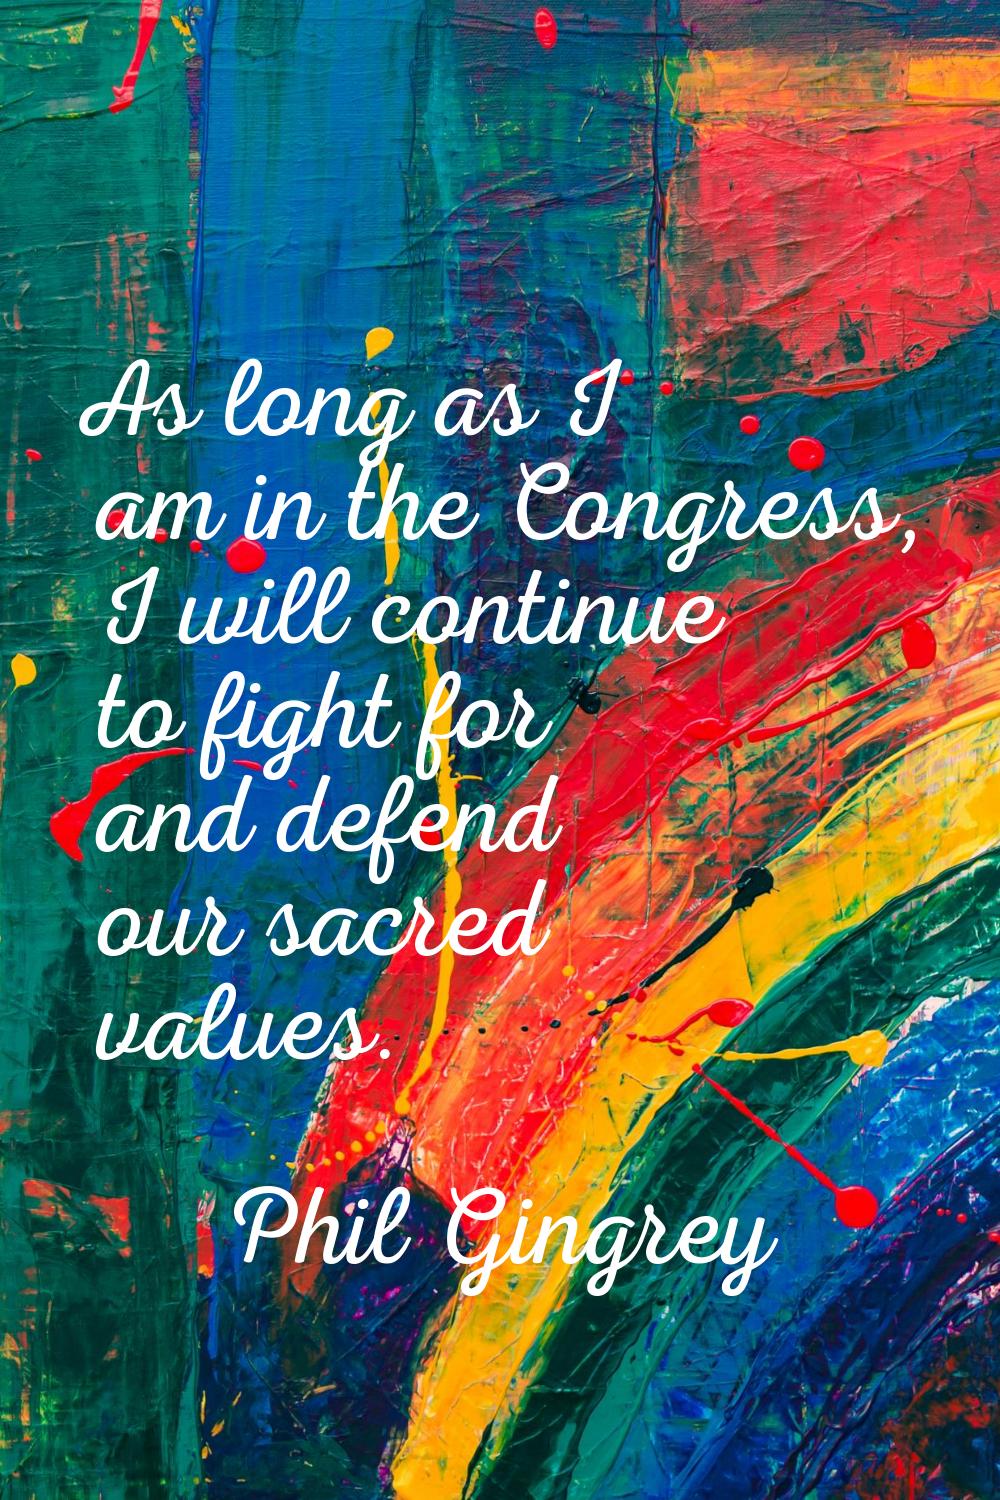 As long as I am in the Congress, I will continue to fight for and defend our sacred values.